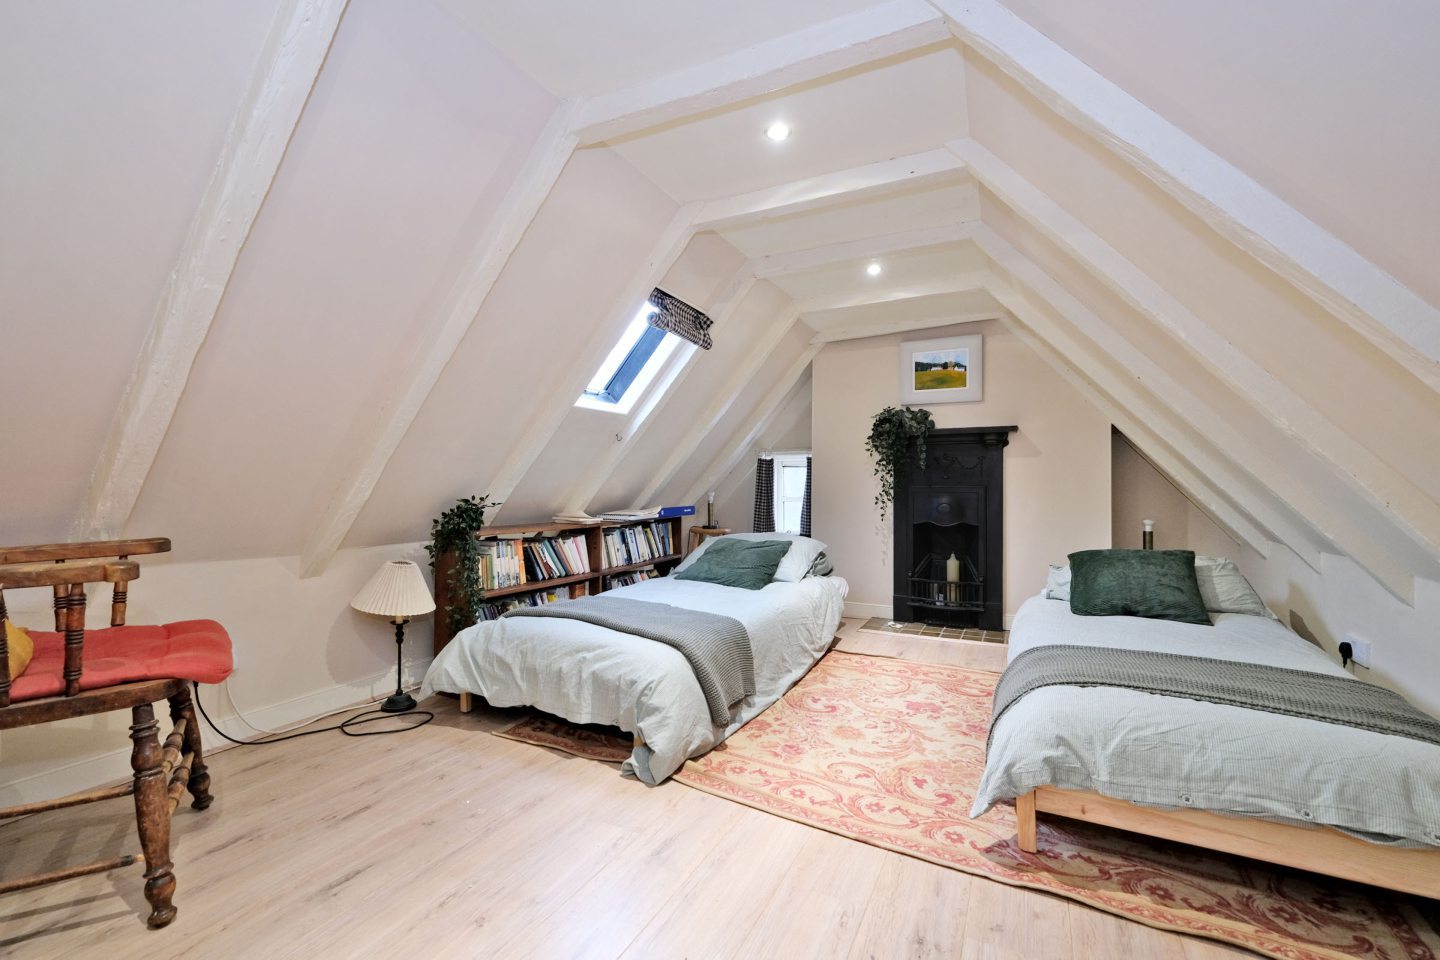 Another bedroom inside the Aberdeen property, featuring sloped ceilings.